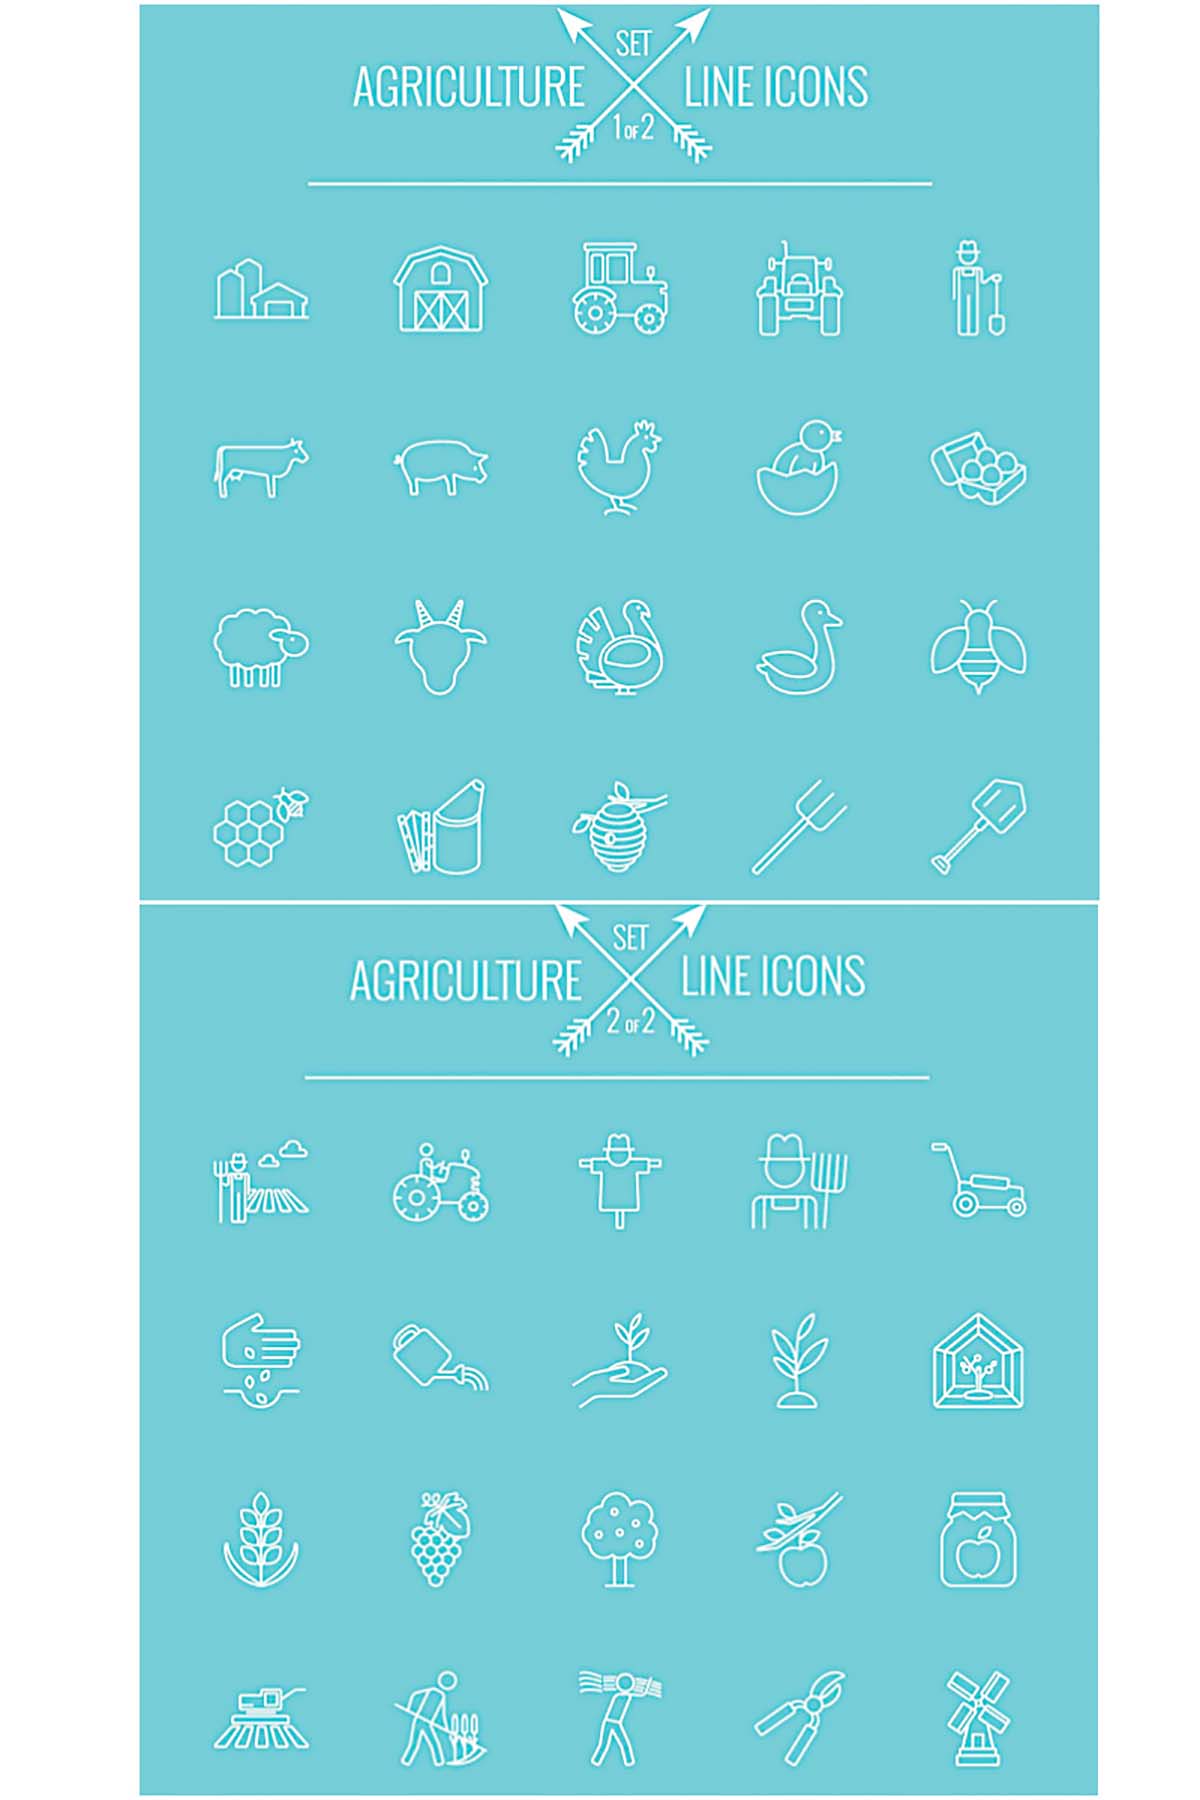 Agriculture clipart and icons vector set